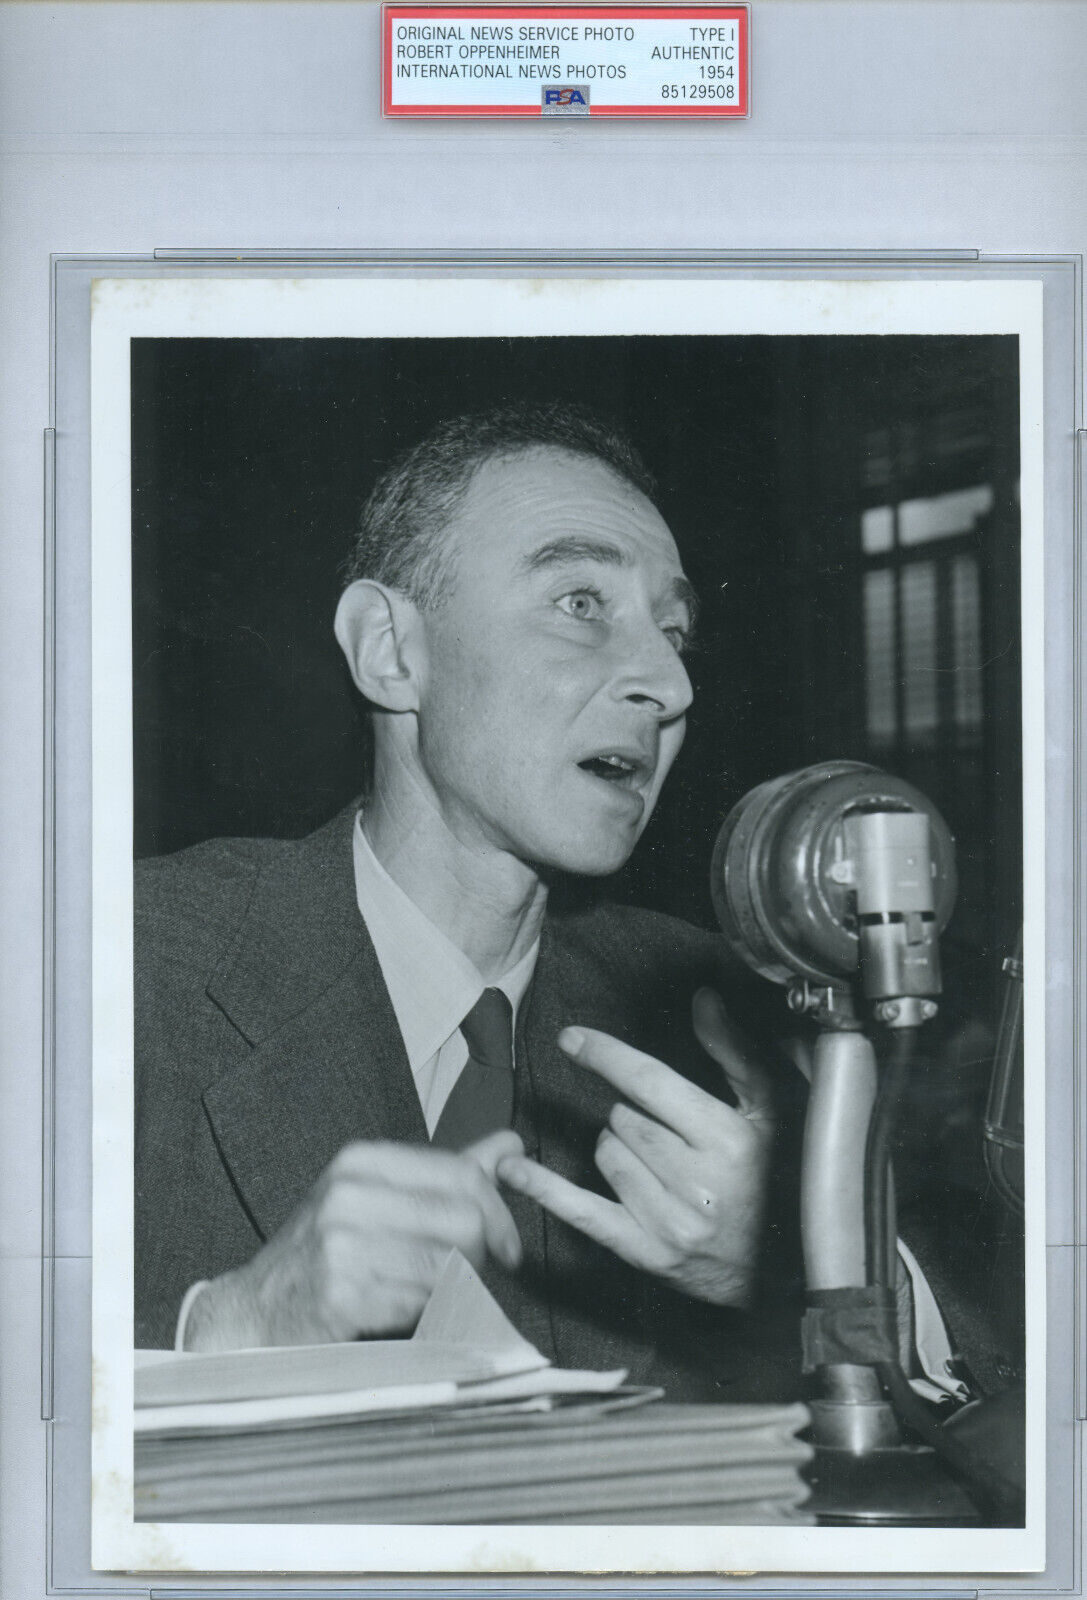 1954 Robert Oppenheimer - Suspended by the AEC Type 1 Photo PSA/DNA ATOMIC BOMB